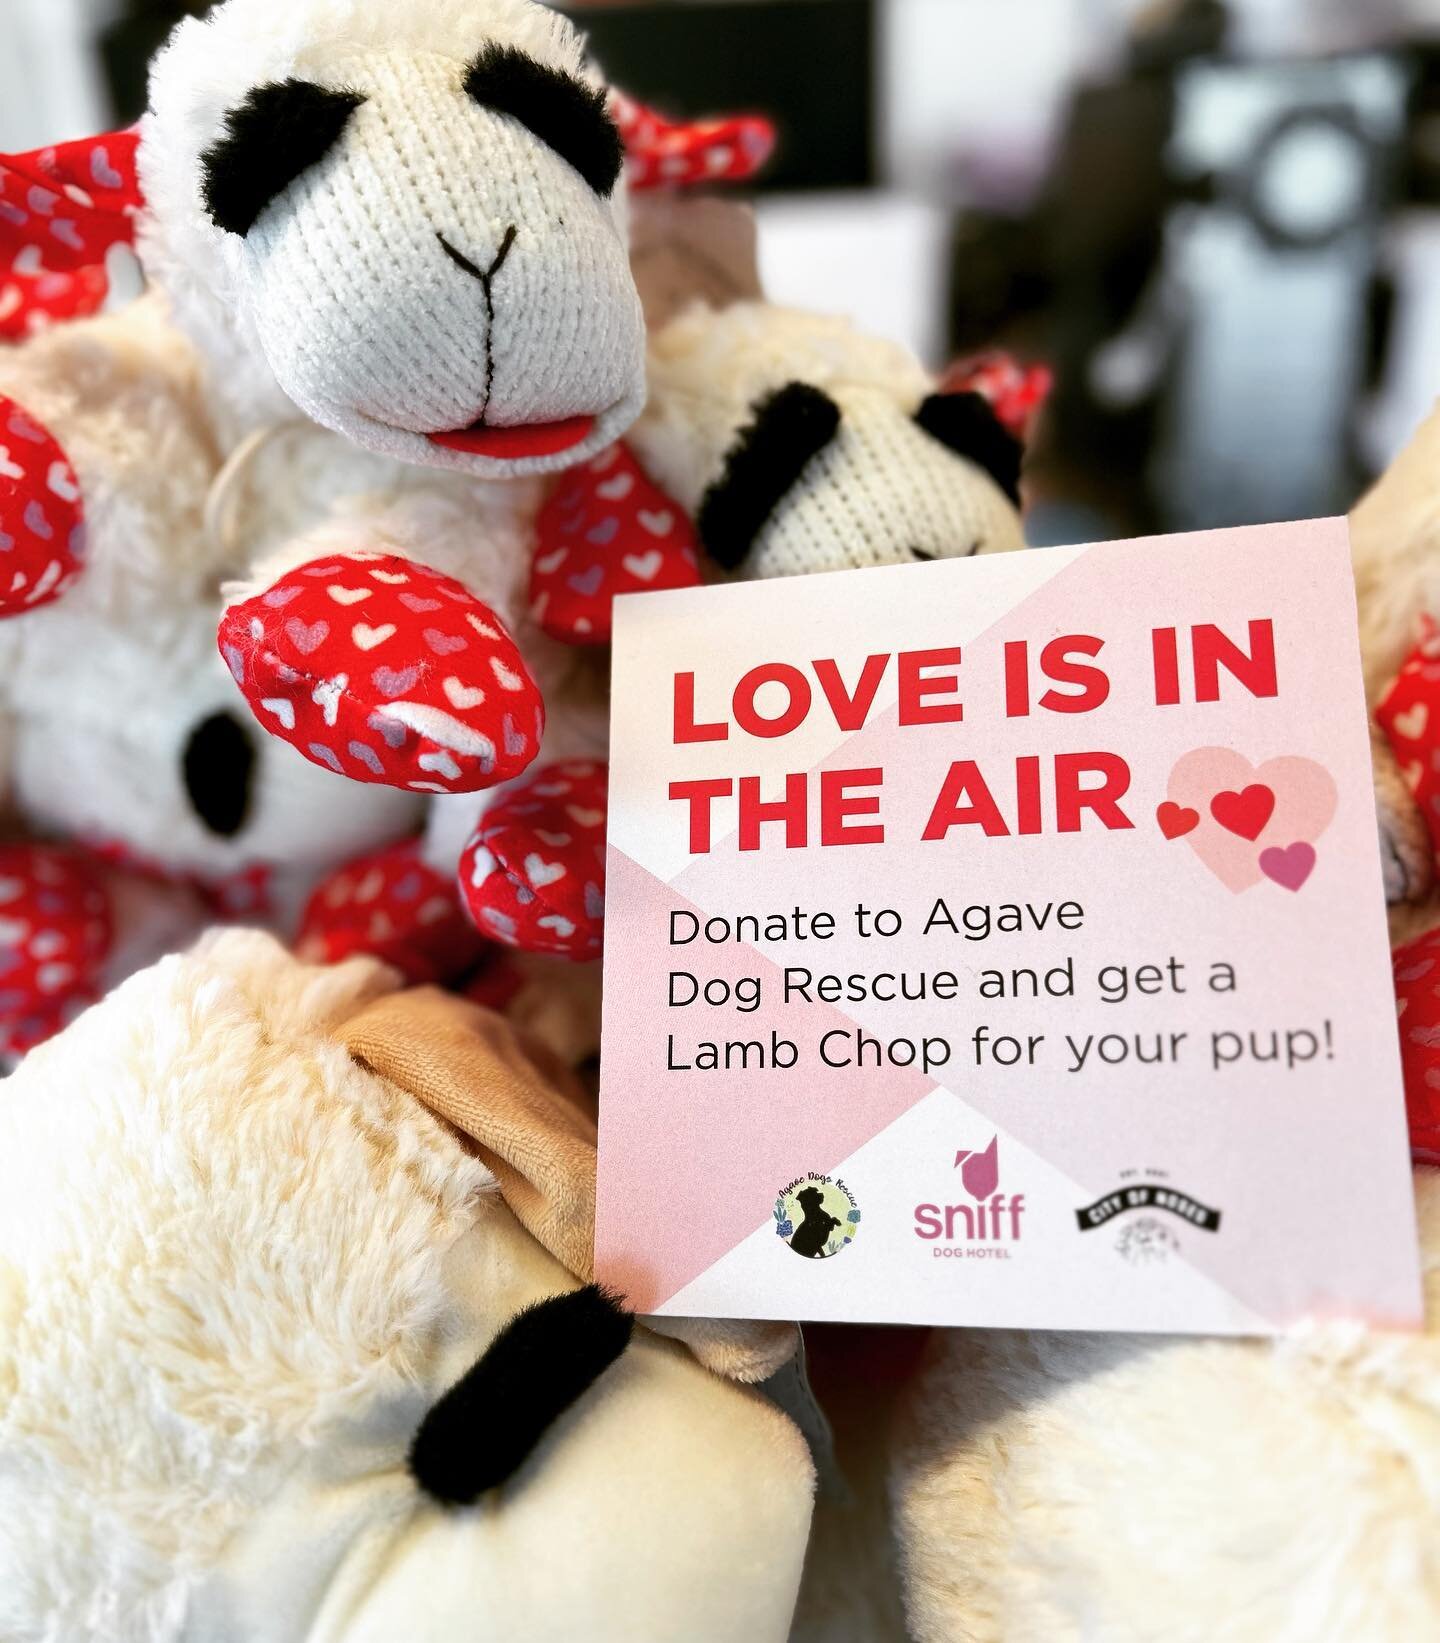 Share the love 💕 with @agavedogsrescue next time you&rsquo;re at @sniffdoghotel @sniffdoghotelbeaverton and take home this lil v-day lamb chop for your pup 💝🐶